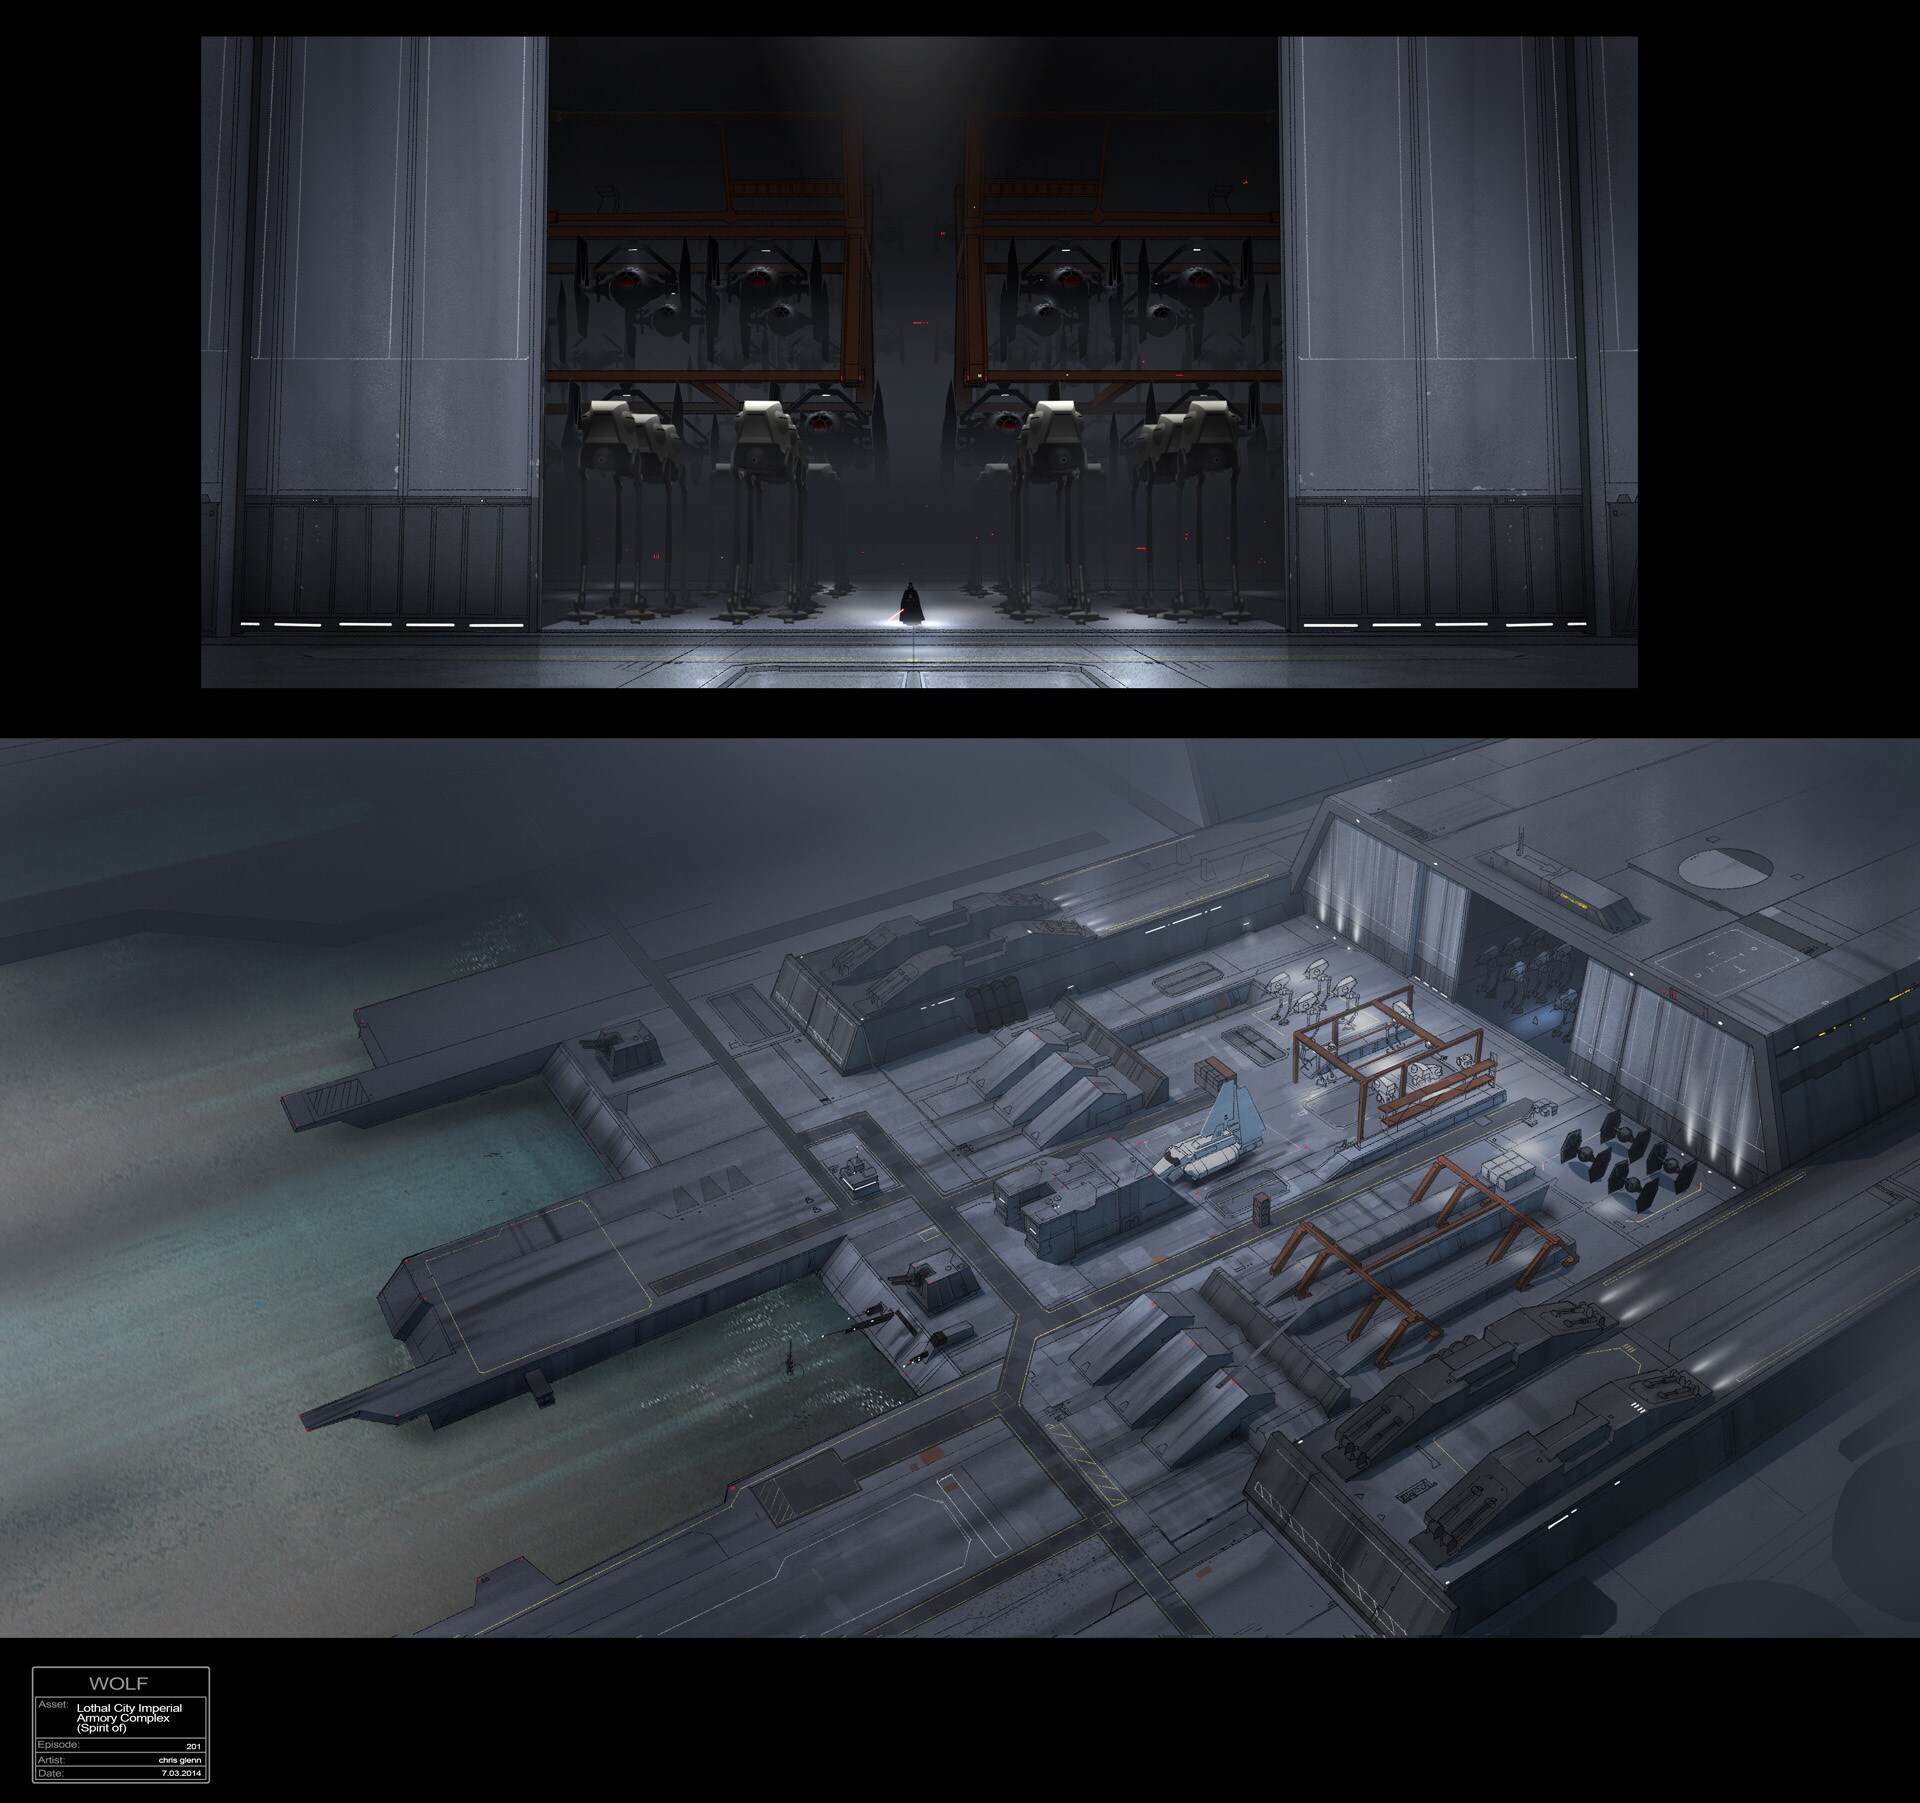 Lothal City Imperial Armory Complex illustration by Chris Glenn.